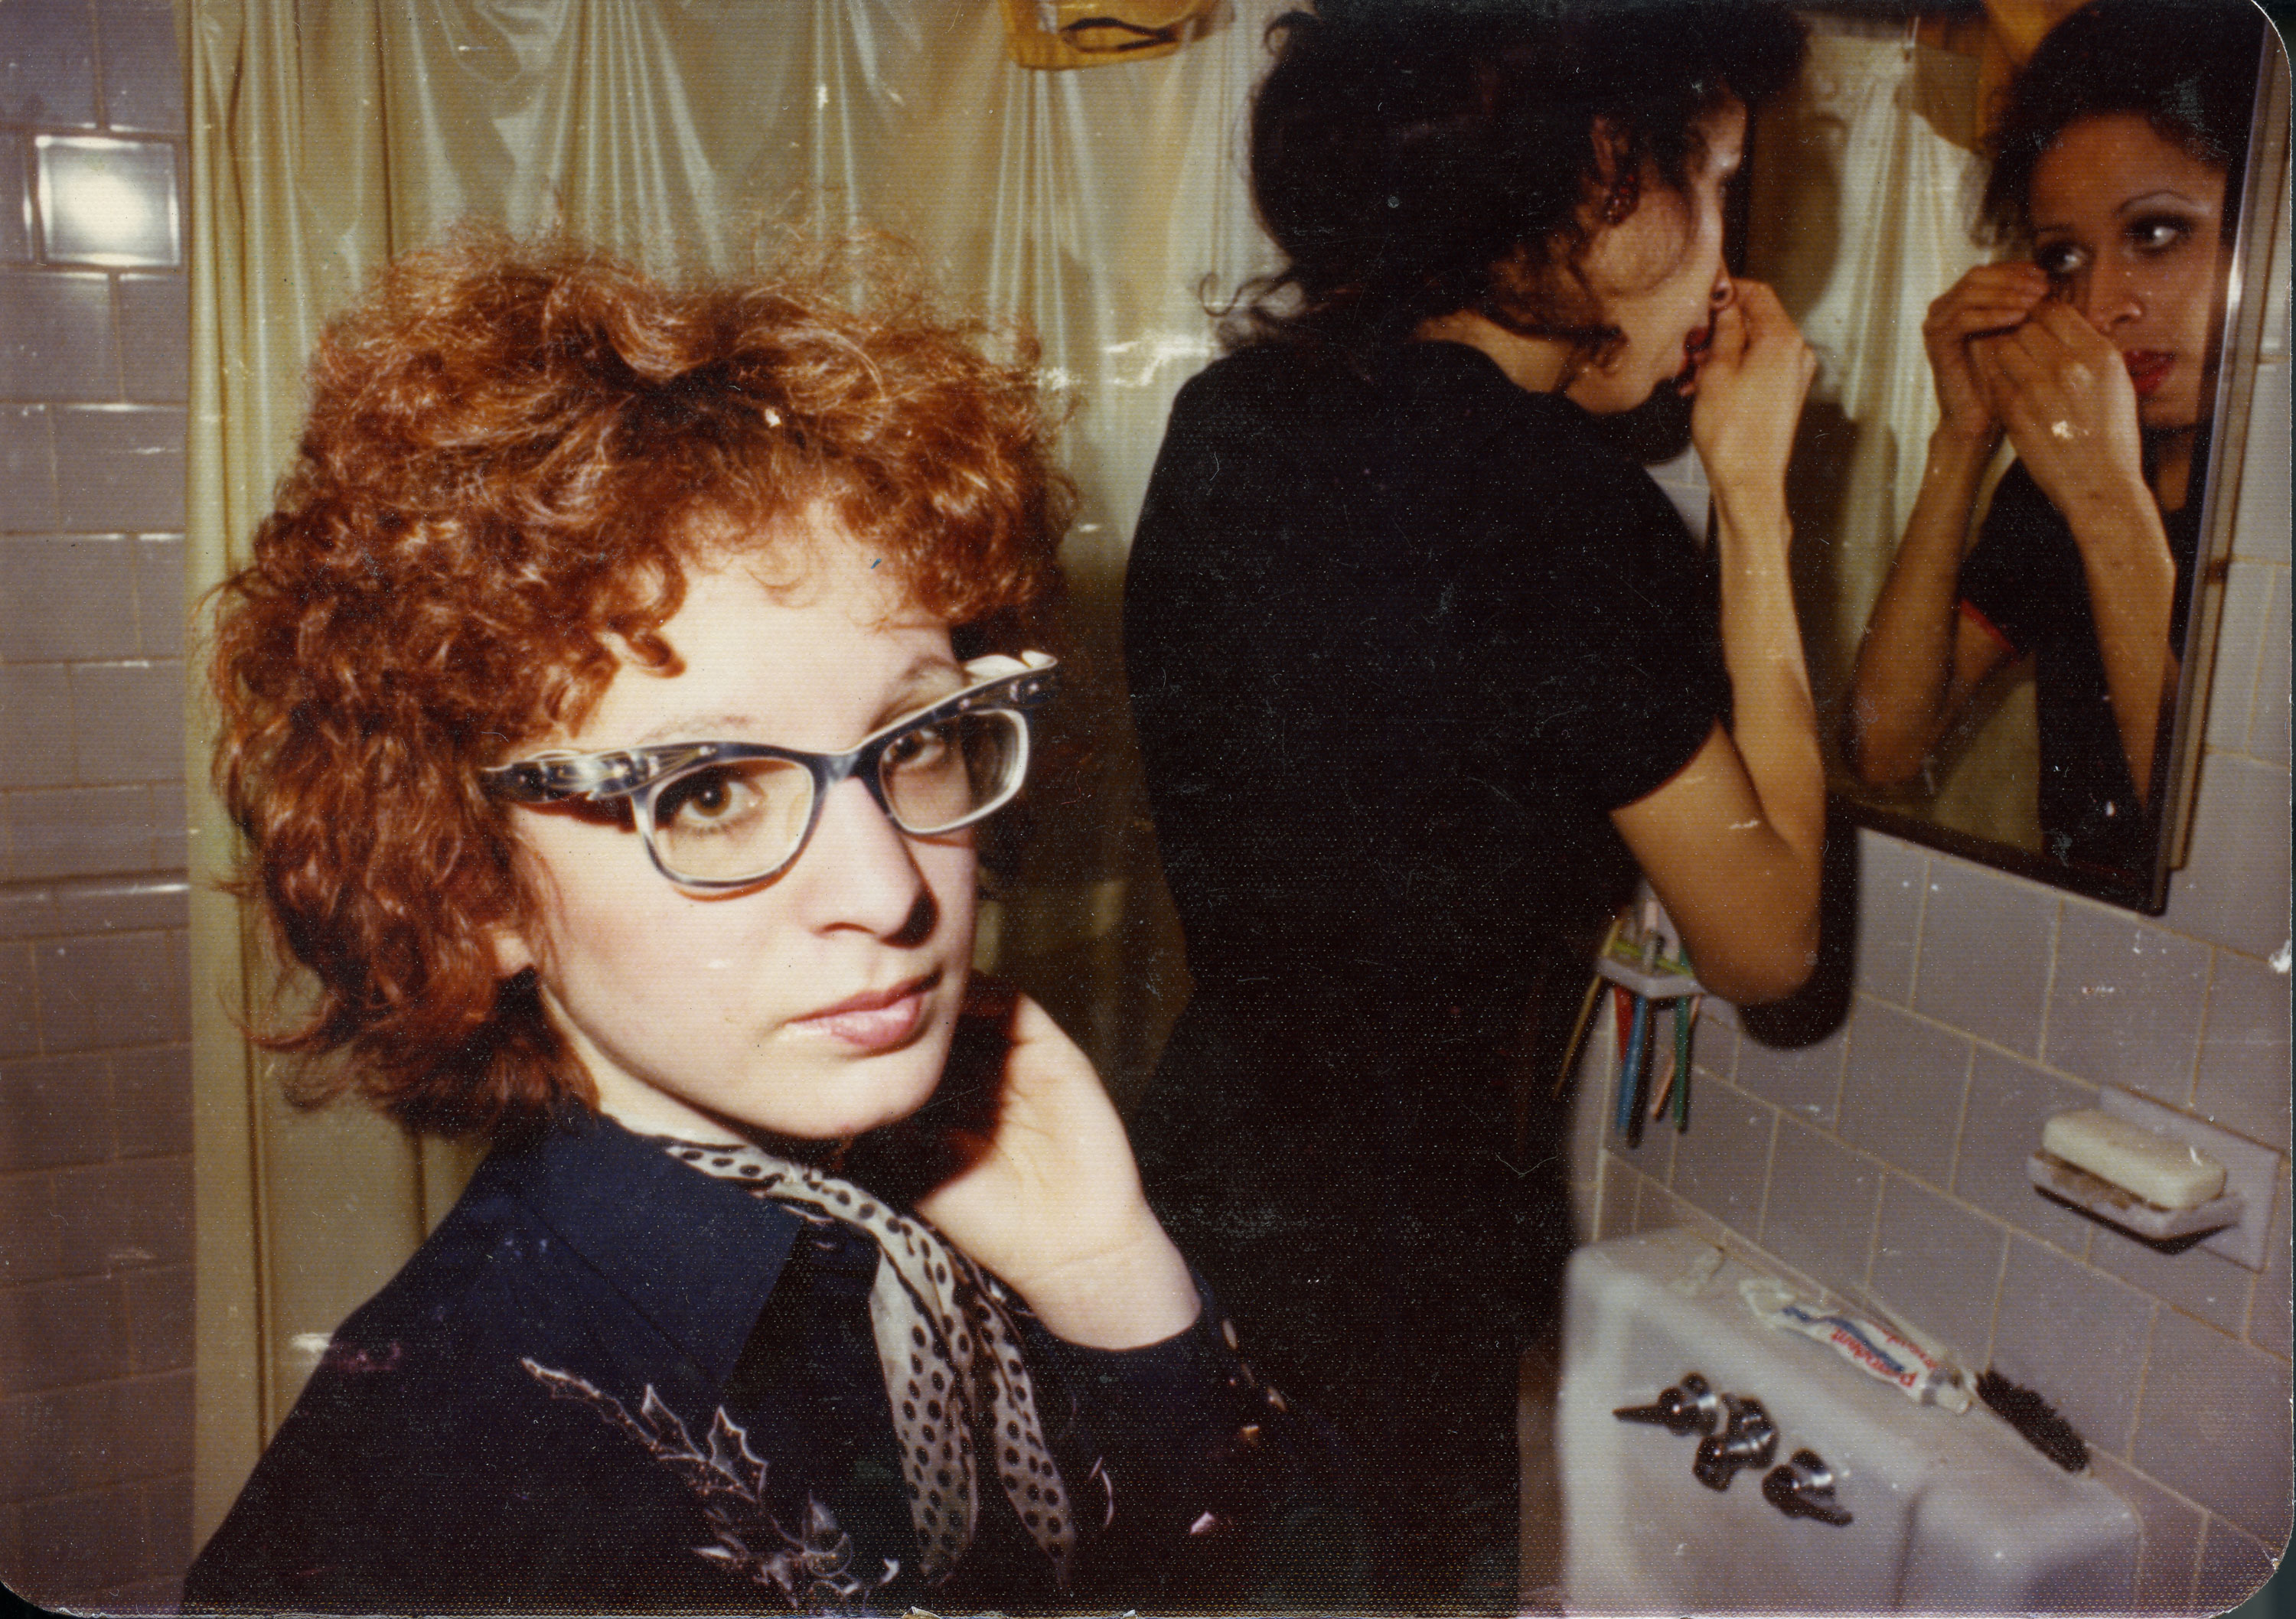 A woman wearing black adjusts her eye makeup in the mirror, while a red-headed woman wearing glasses looks at the camera in the foreground. From Laura Poitras' ‘All the Beauty and the Bloodshed.’ Photo courtesy of Neon.